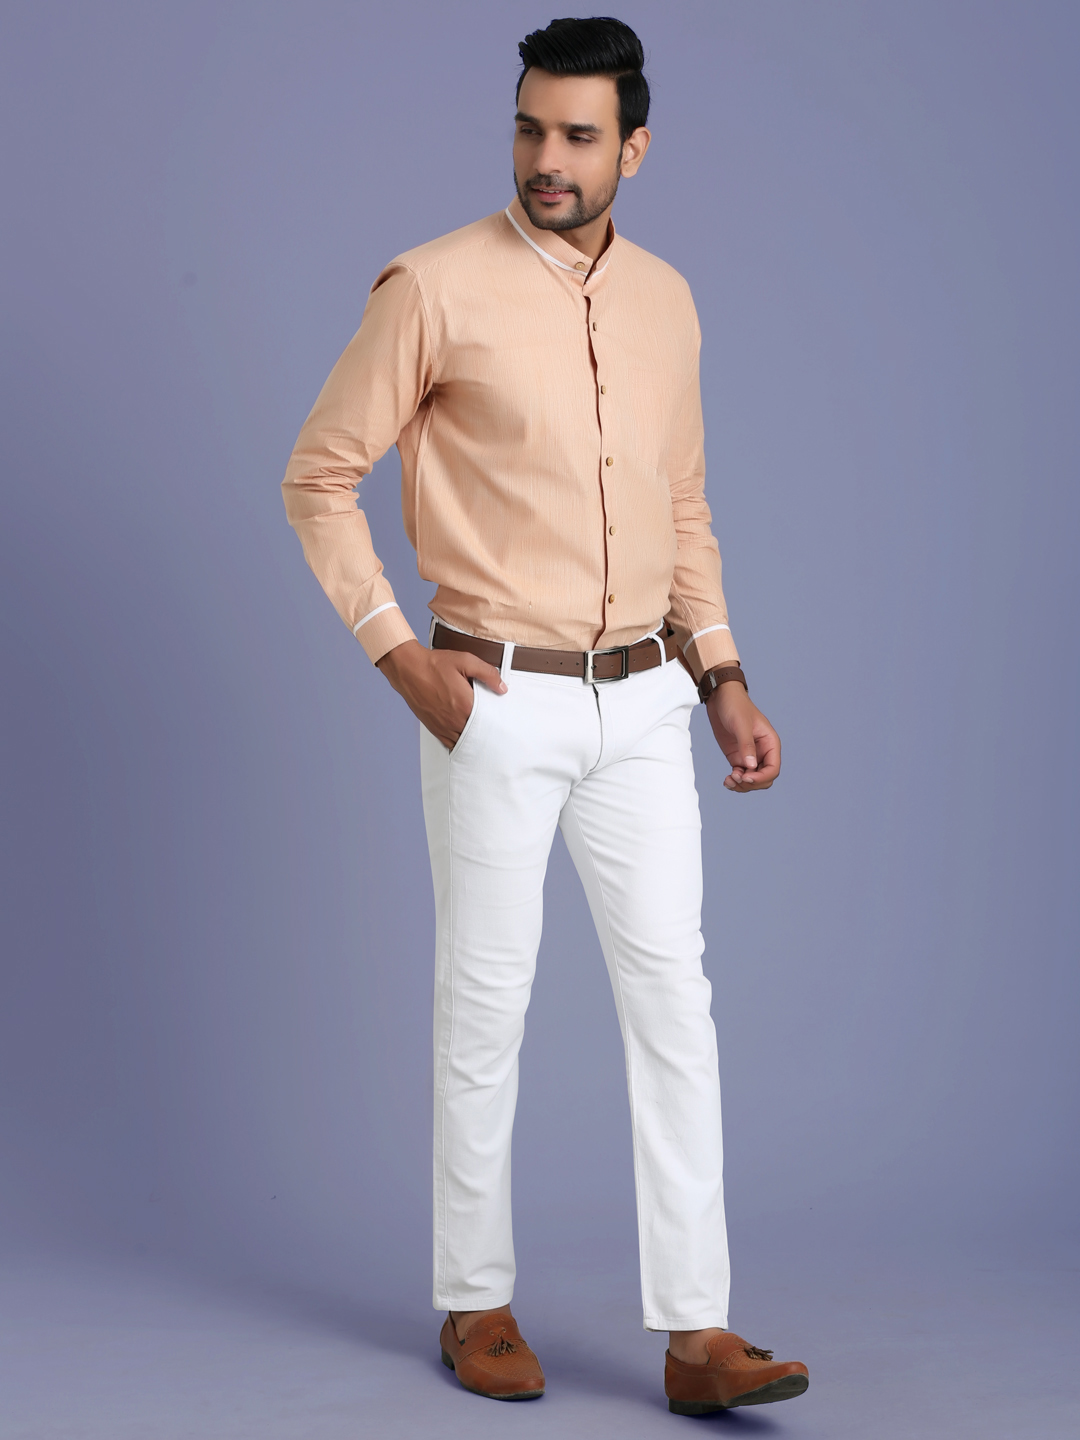 Here Are 20 Outfits Of White Pants For Men - Fashion Inspiration and  Discovery | White pants men, White jeans men, Jeans outfit men